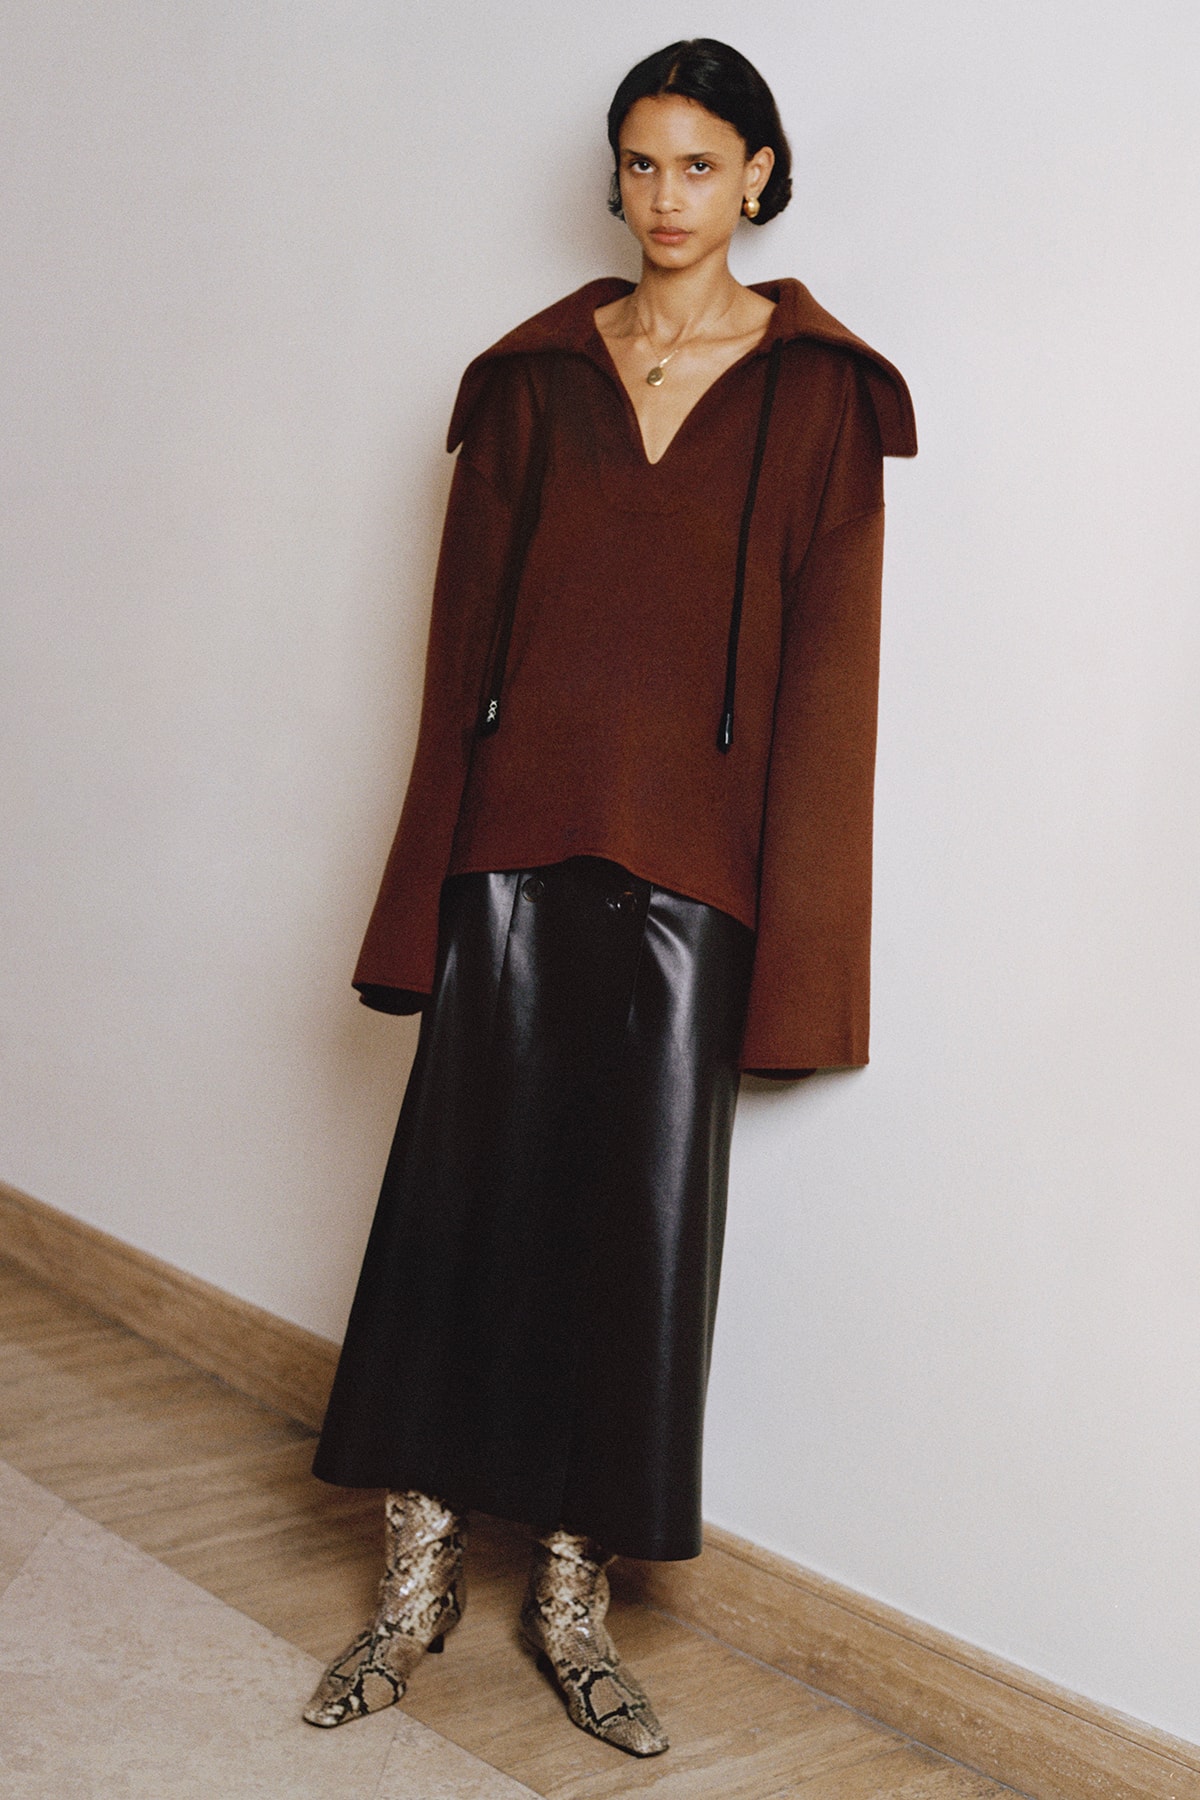 Nanushka Fall/Winter Collection Lookbook Knit Pullover Leather SKirt